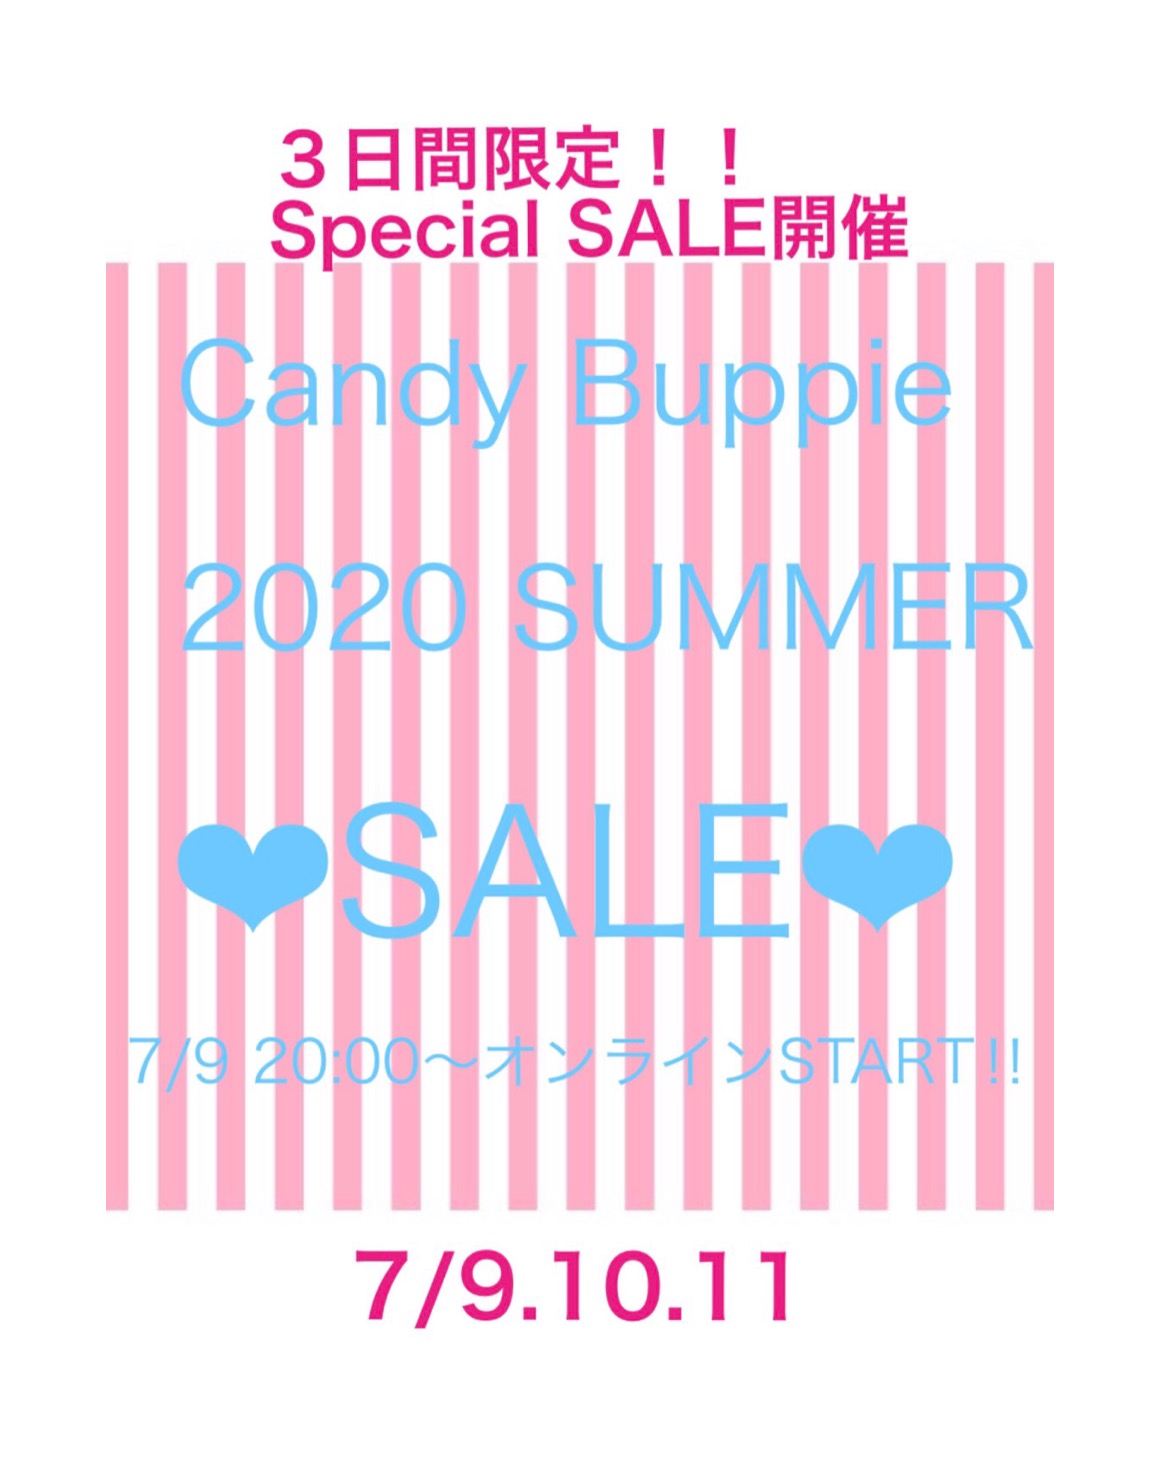 Special SALE  限定3日間❣️